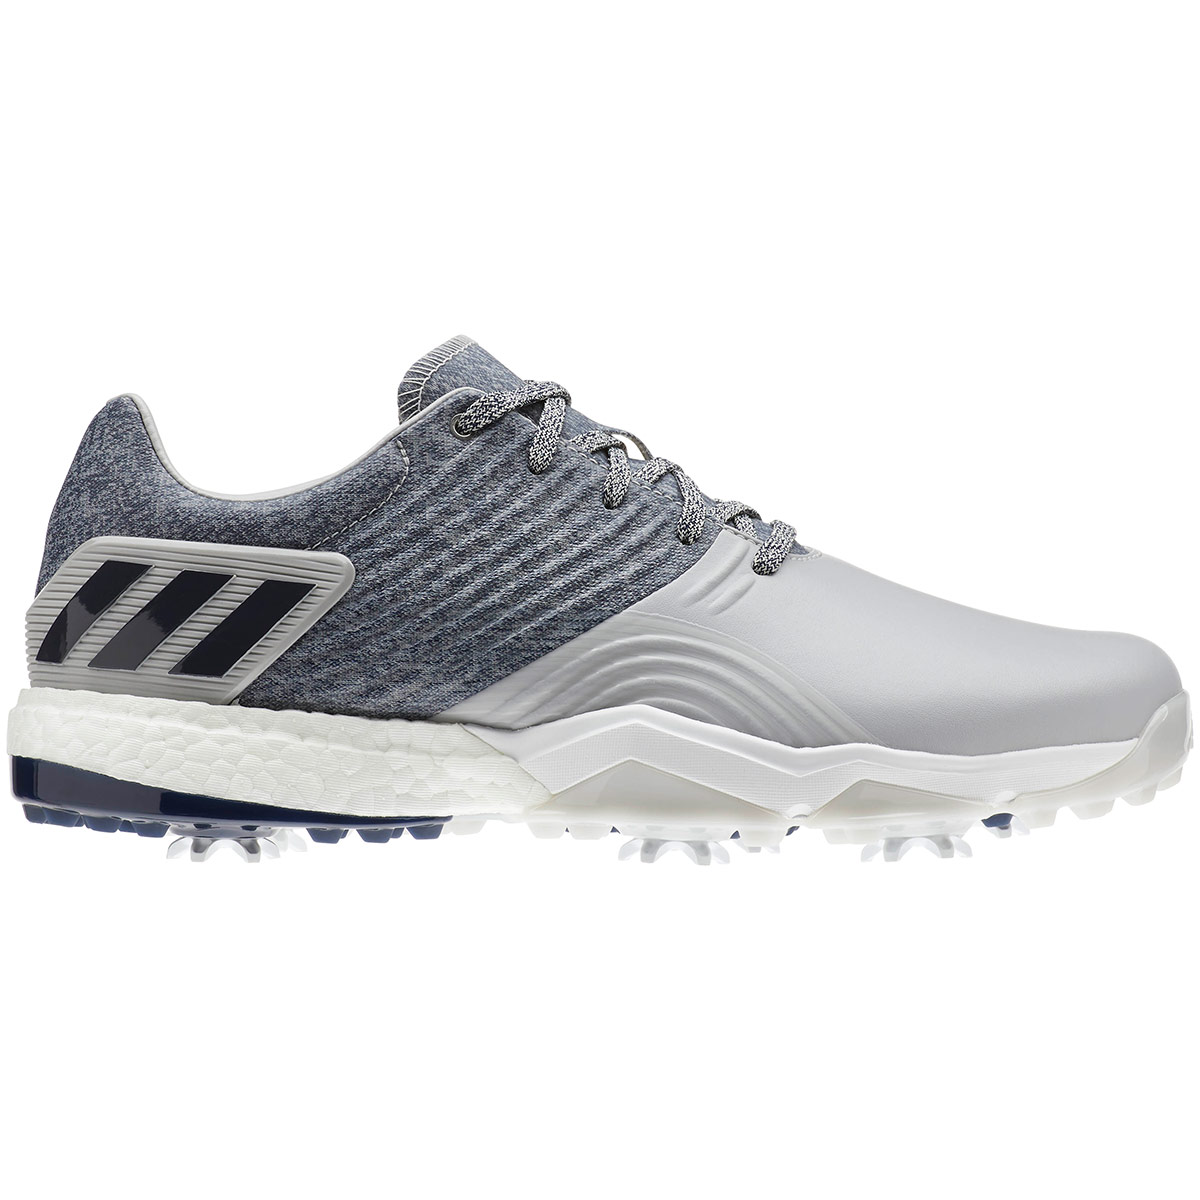 adidas Golf Adipower 4Orged Shoes from 